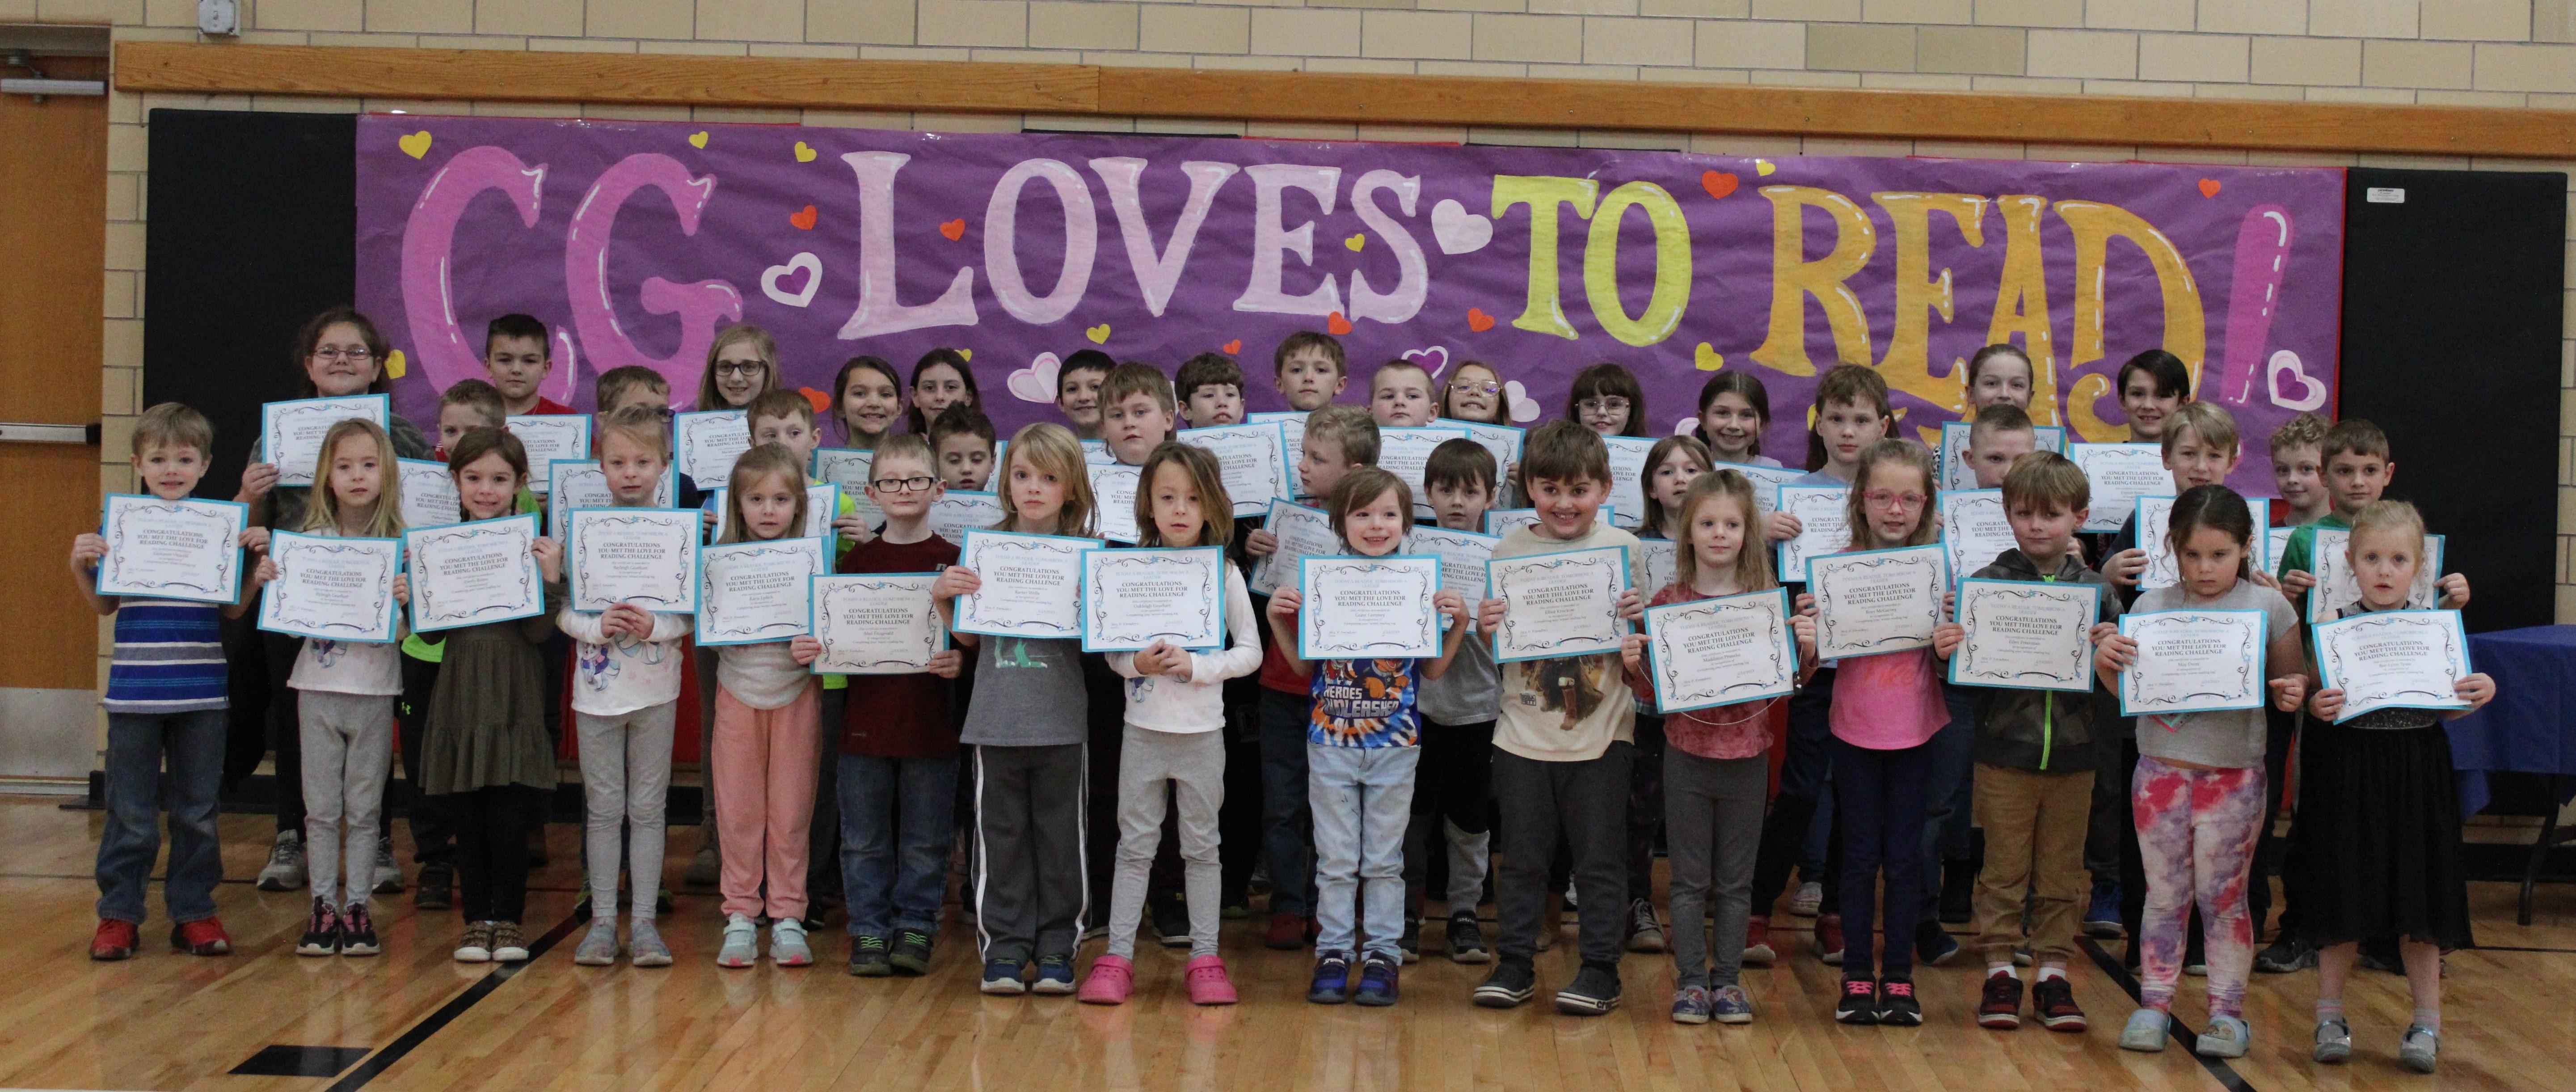 On February 23rd C.G. Johnson Elementary School recognized the students who met the 'Reading Challenge' that was presented by the Title 1 teacher, Mrs. Paula Foradori.